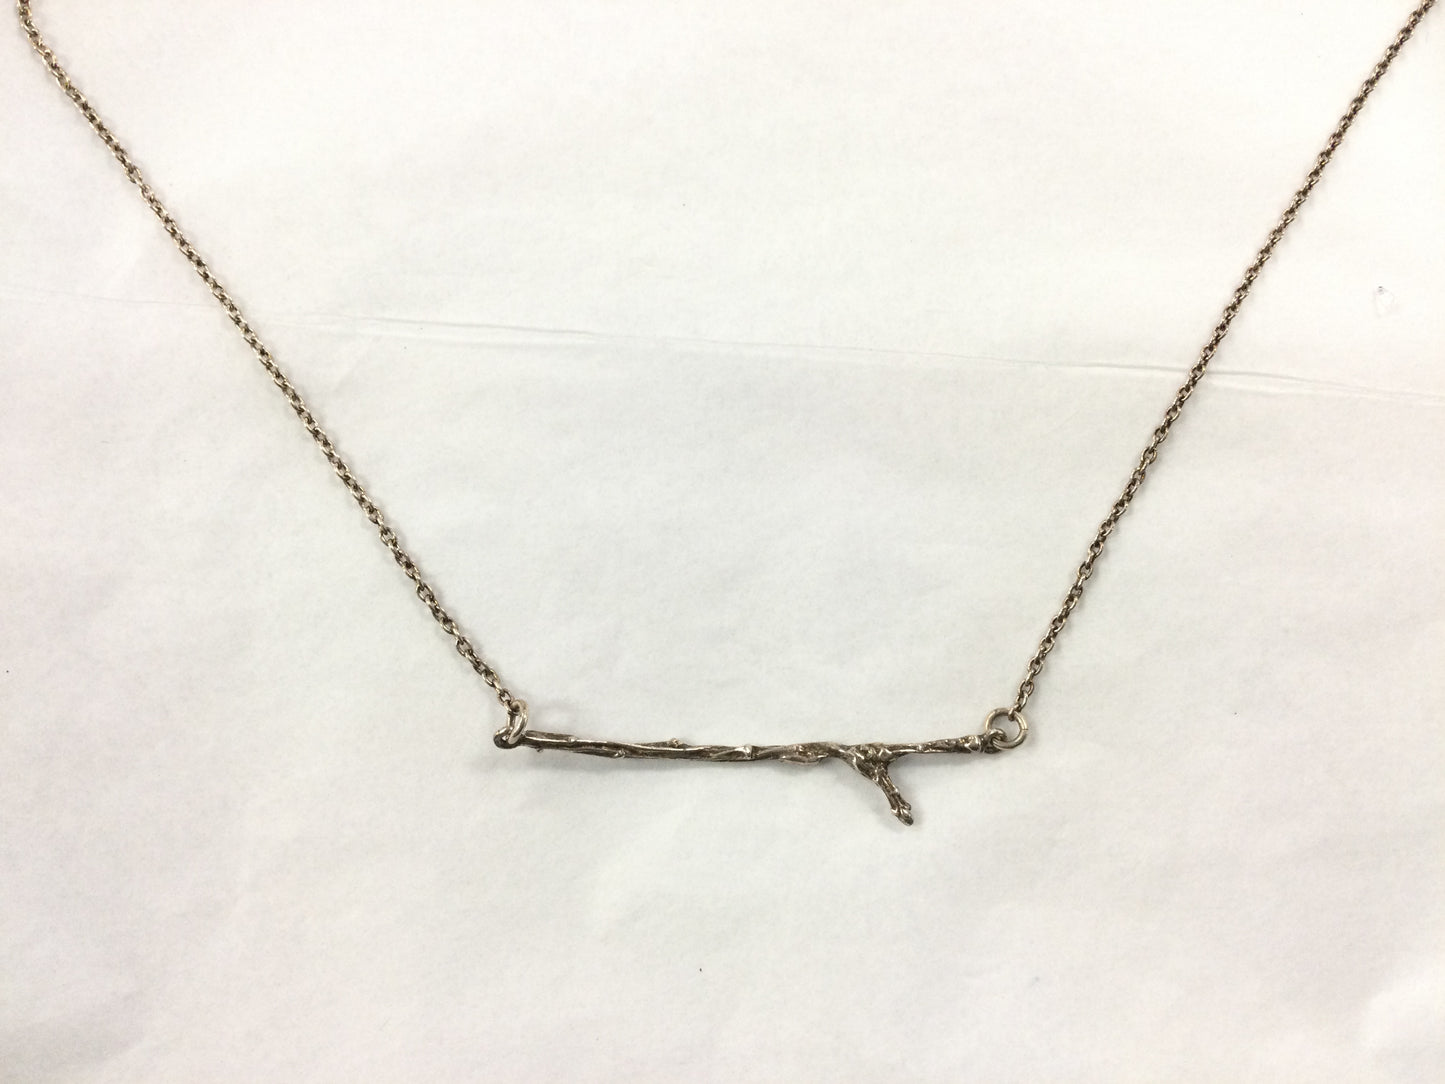 Silver Necklace With Attached Branch Pendant